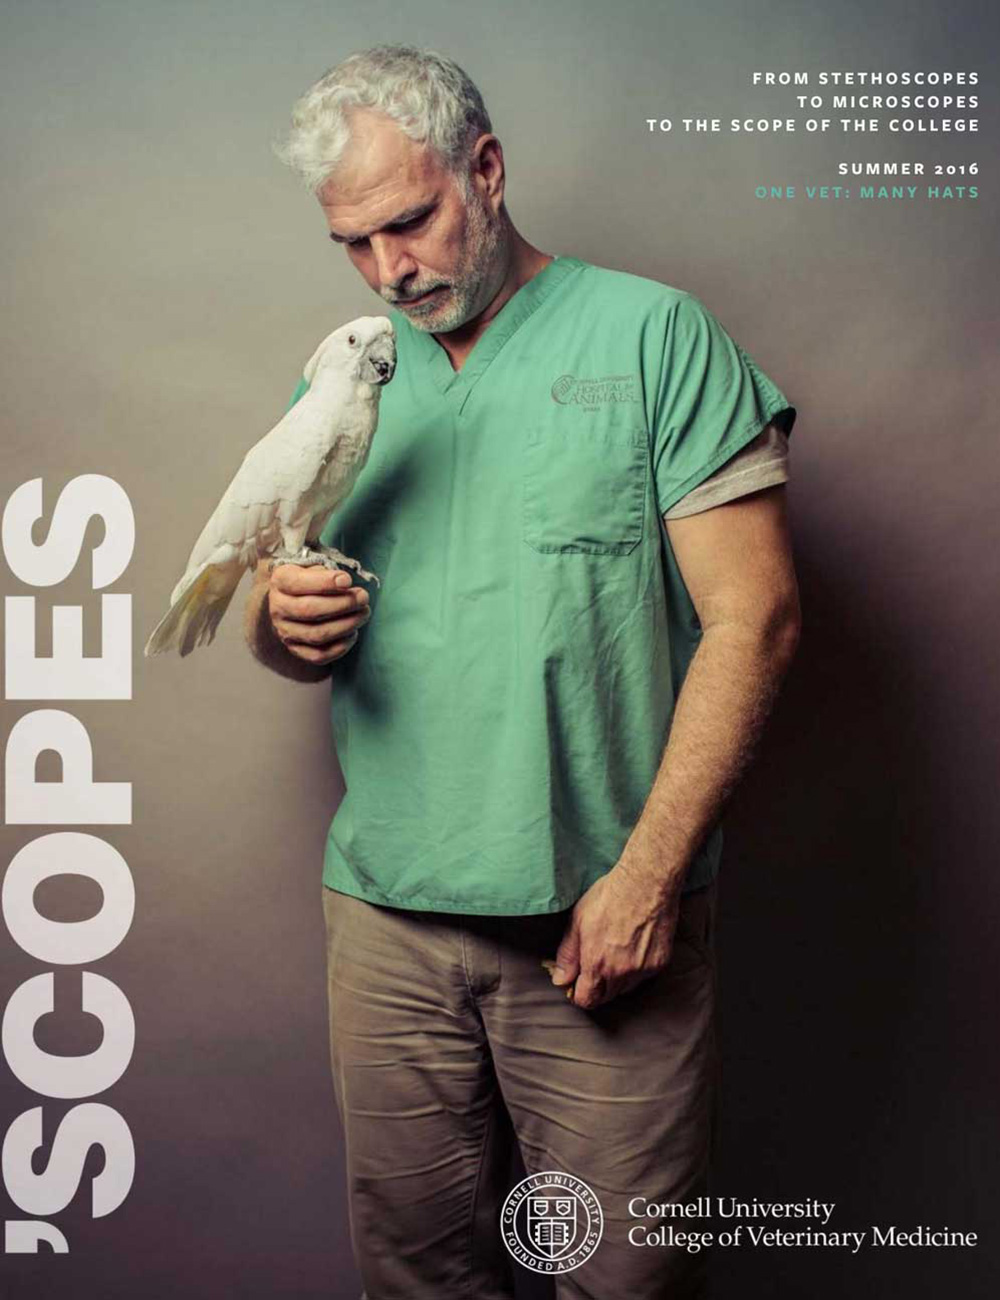 'Scopes summer 2016 cover featuring veterinarian with a cockatoo